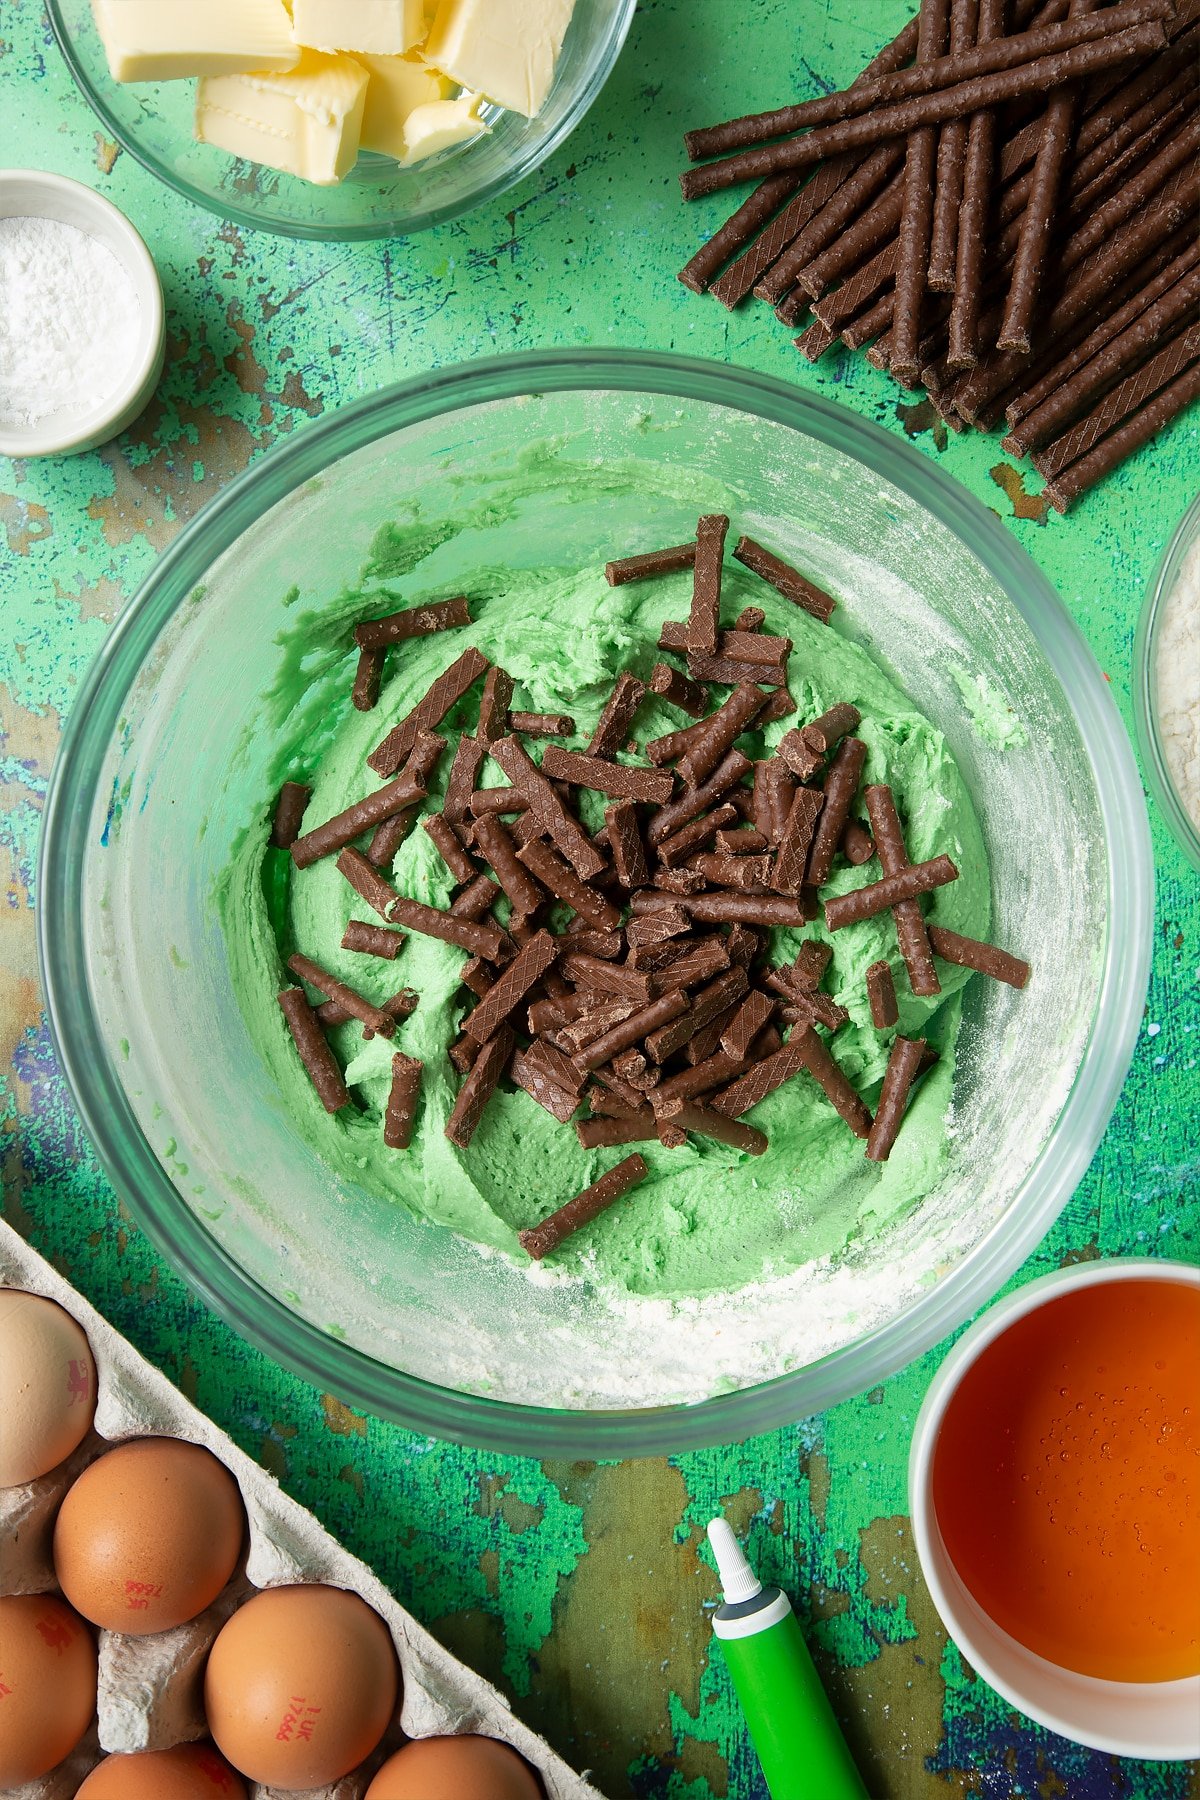 Green cookie dough in a mixing bowl, topped with Matchmaker pieces.